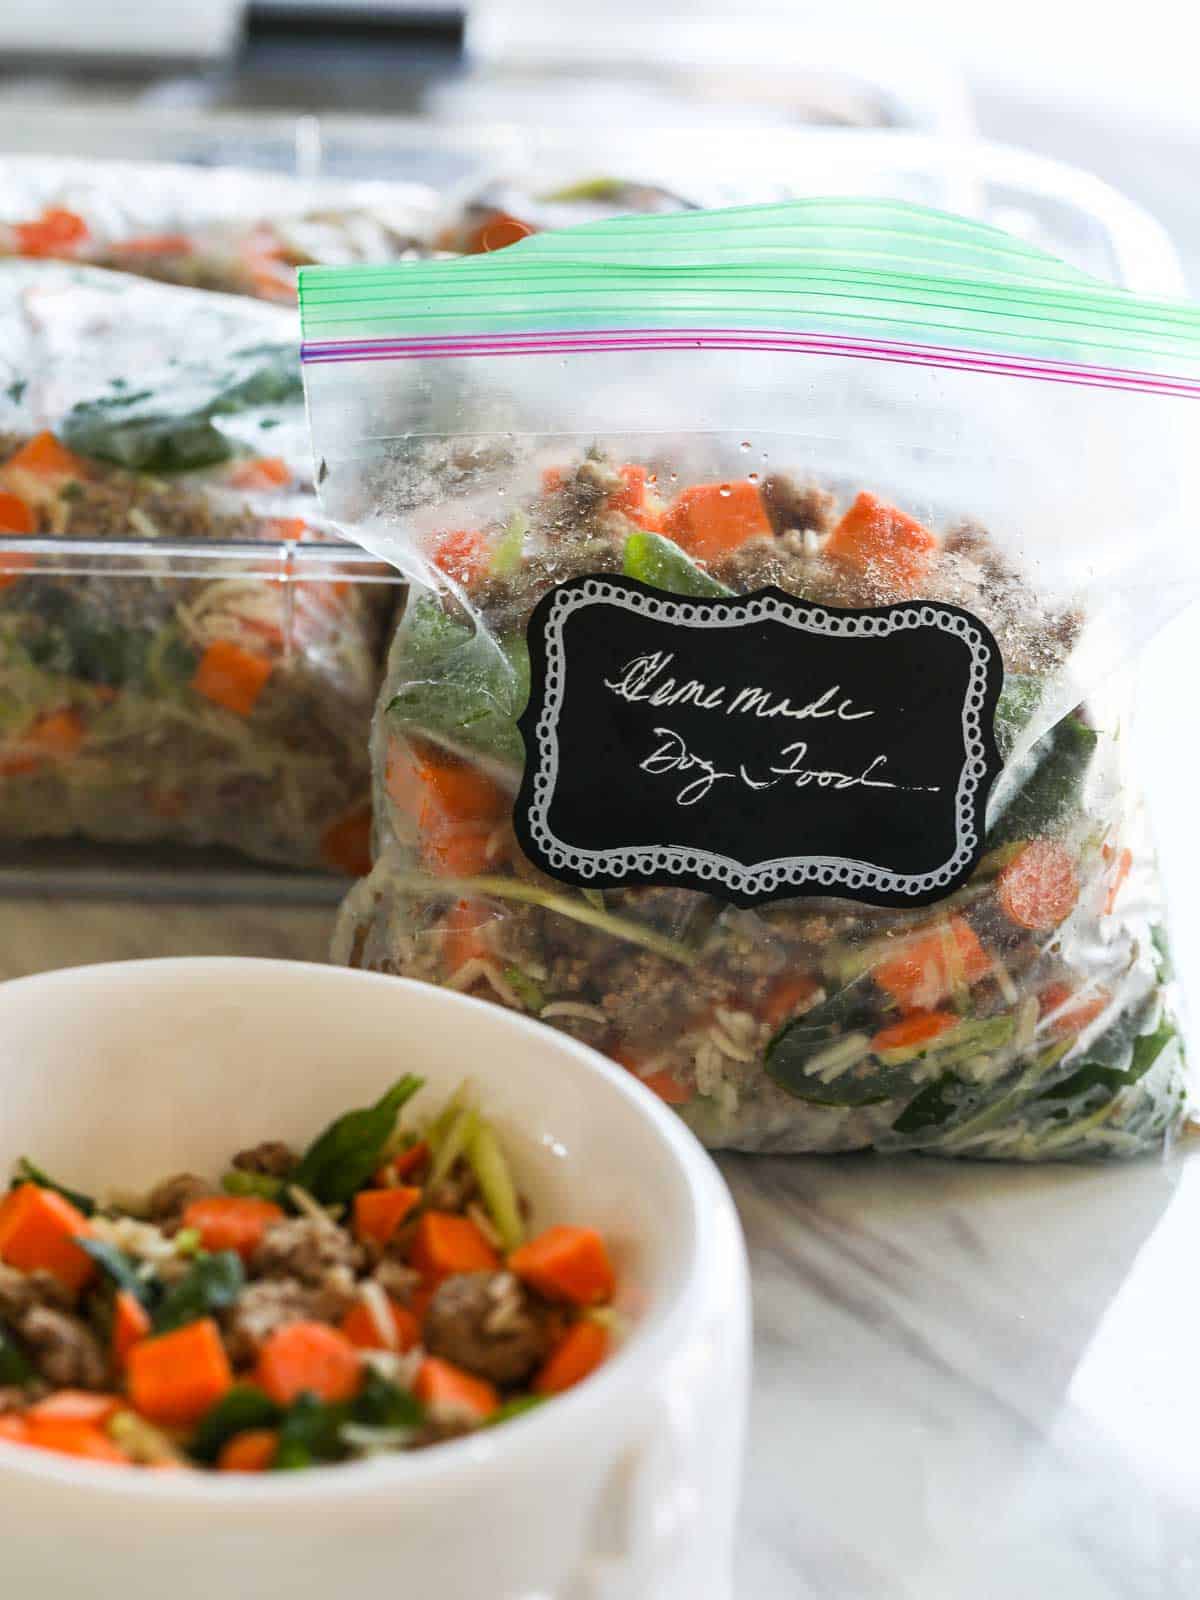 Healthy Dog Food Meal Prep: Homemade Dog Food for a Happy Pup - Creative in  My Kitchen